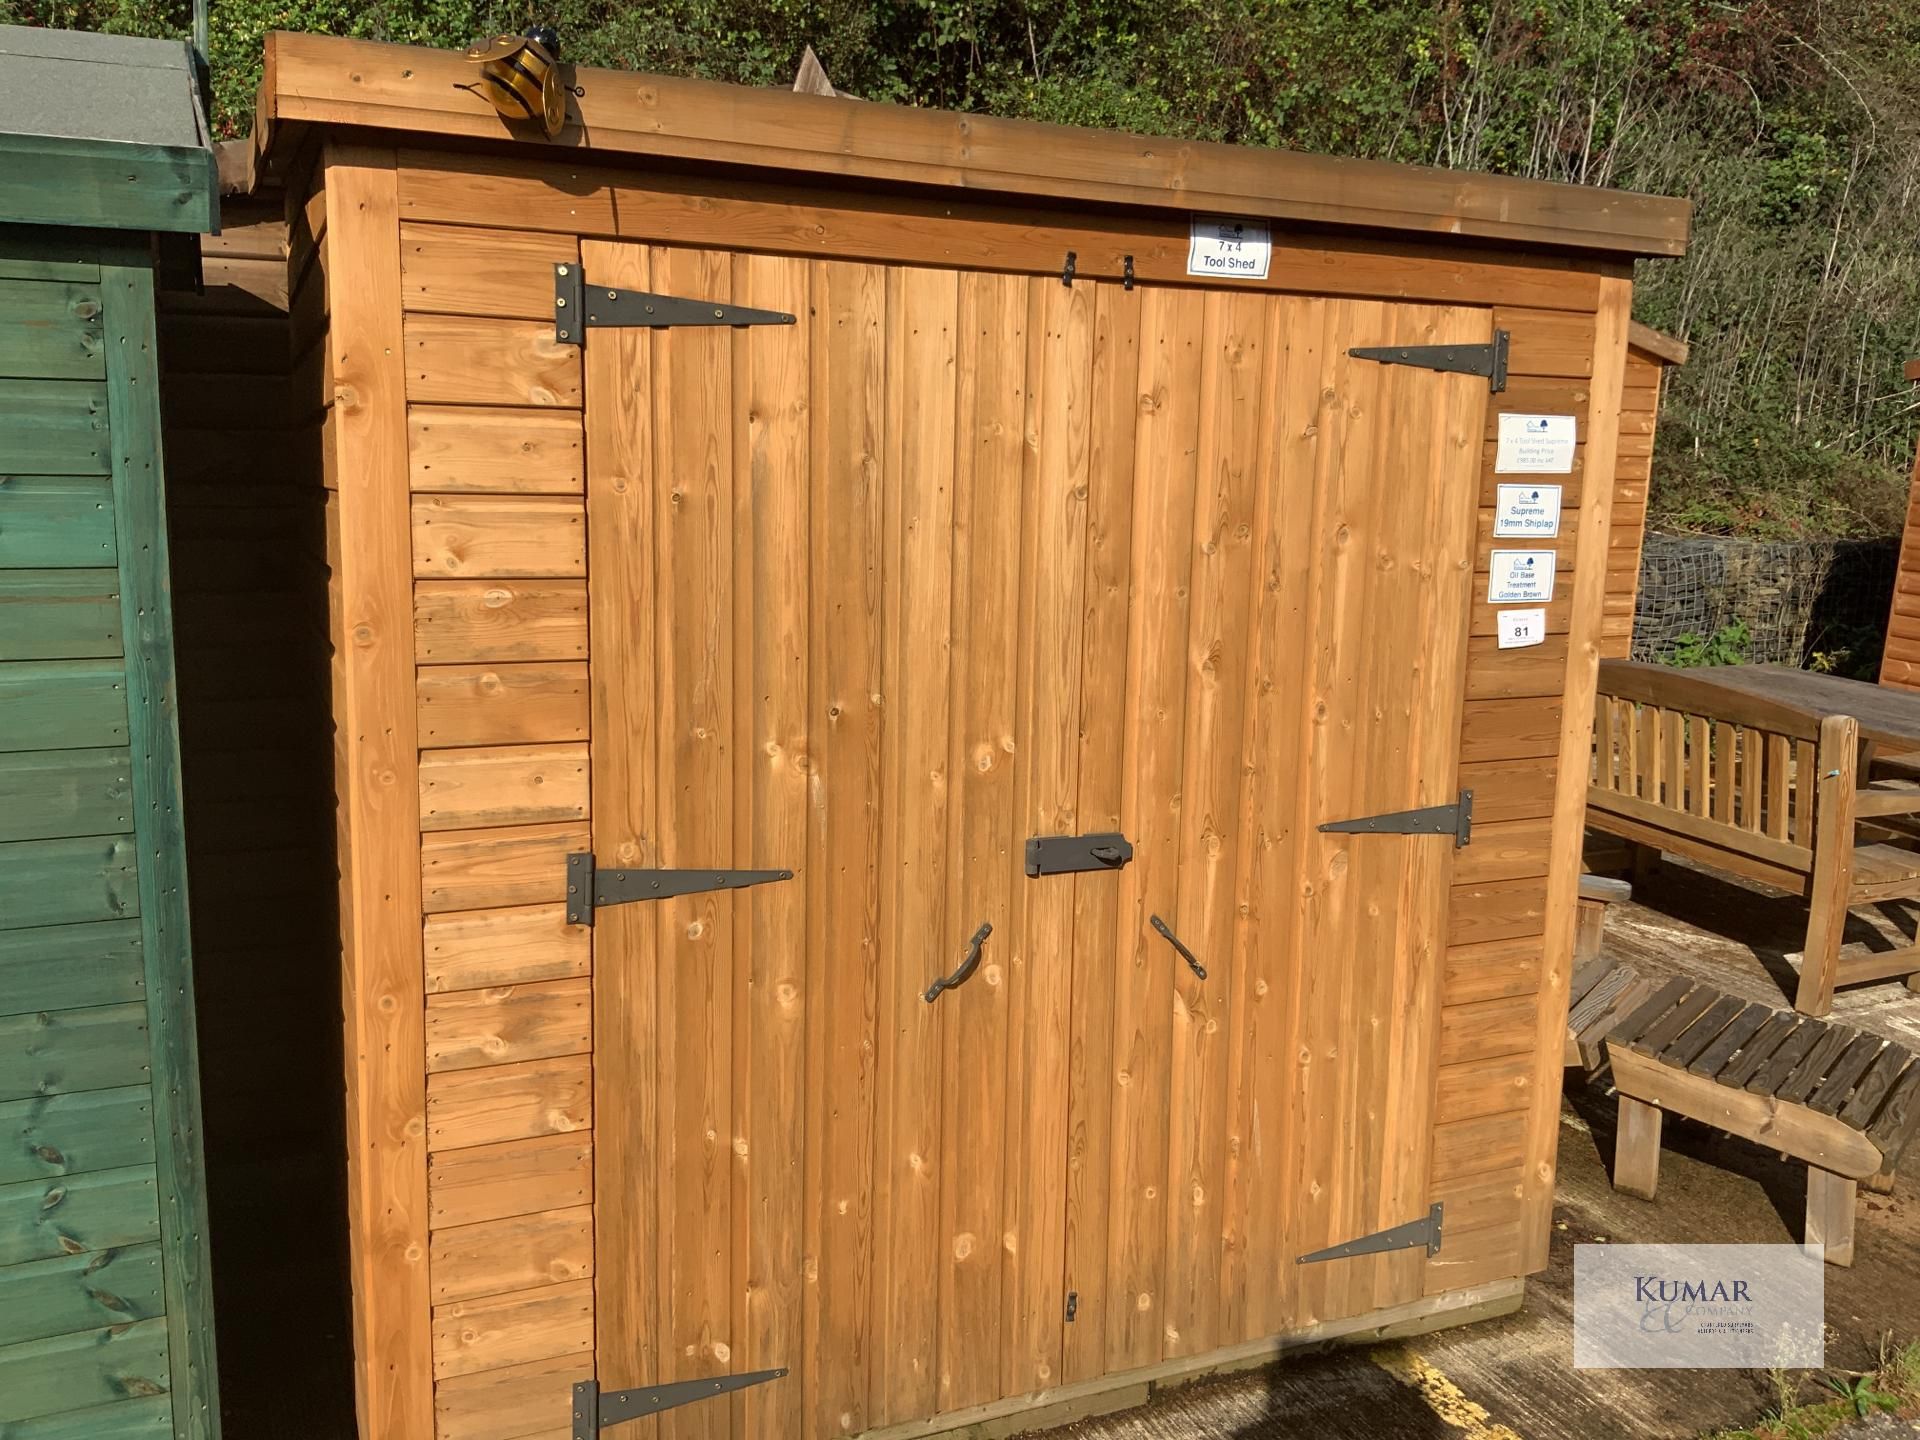 7 x 4 Supreme Tool Shed with Double Doors, Supreme 19mm ShipLap, Oil Base Treatment Golden Brown, - Image 2 of 8